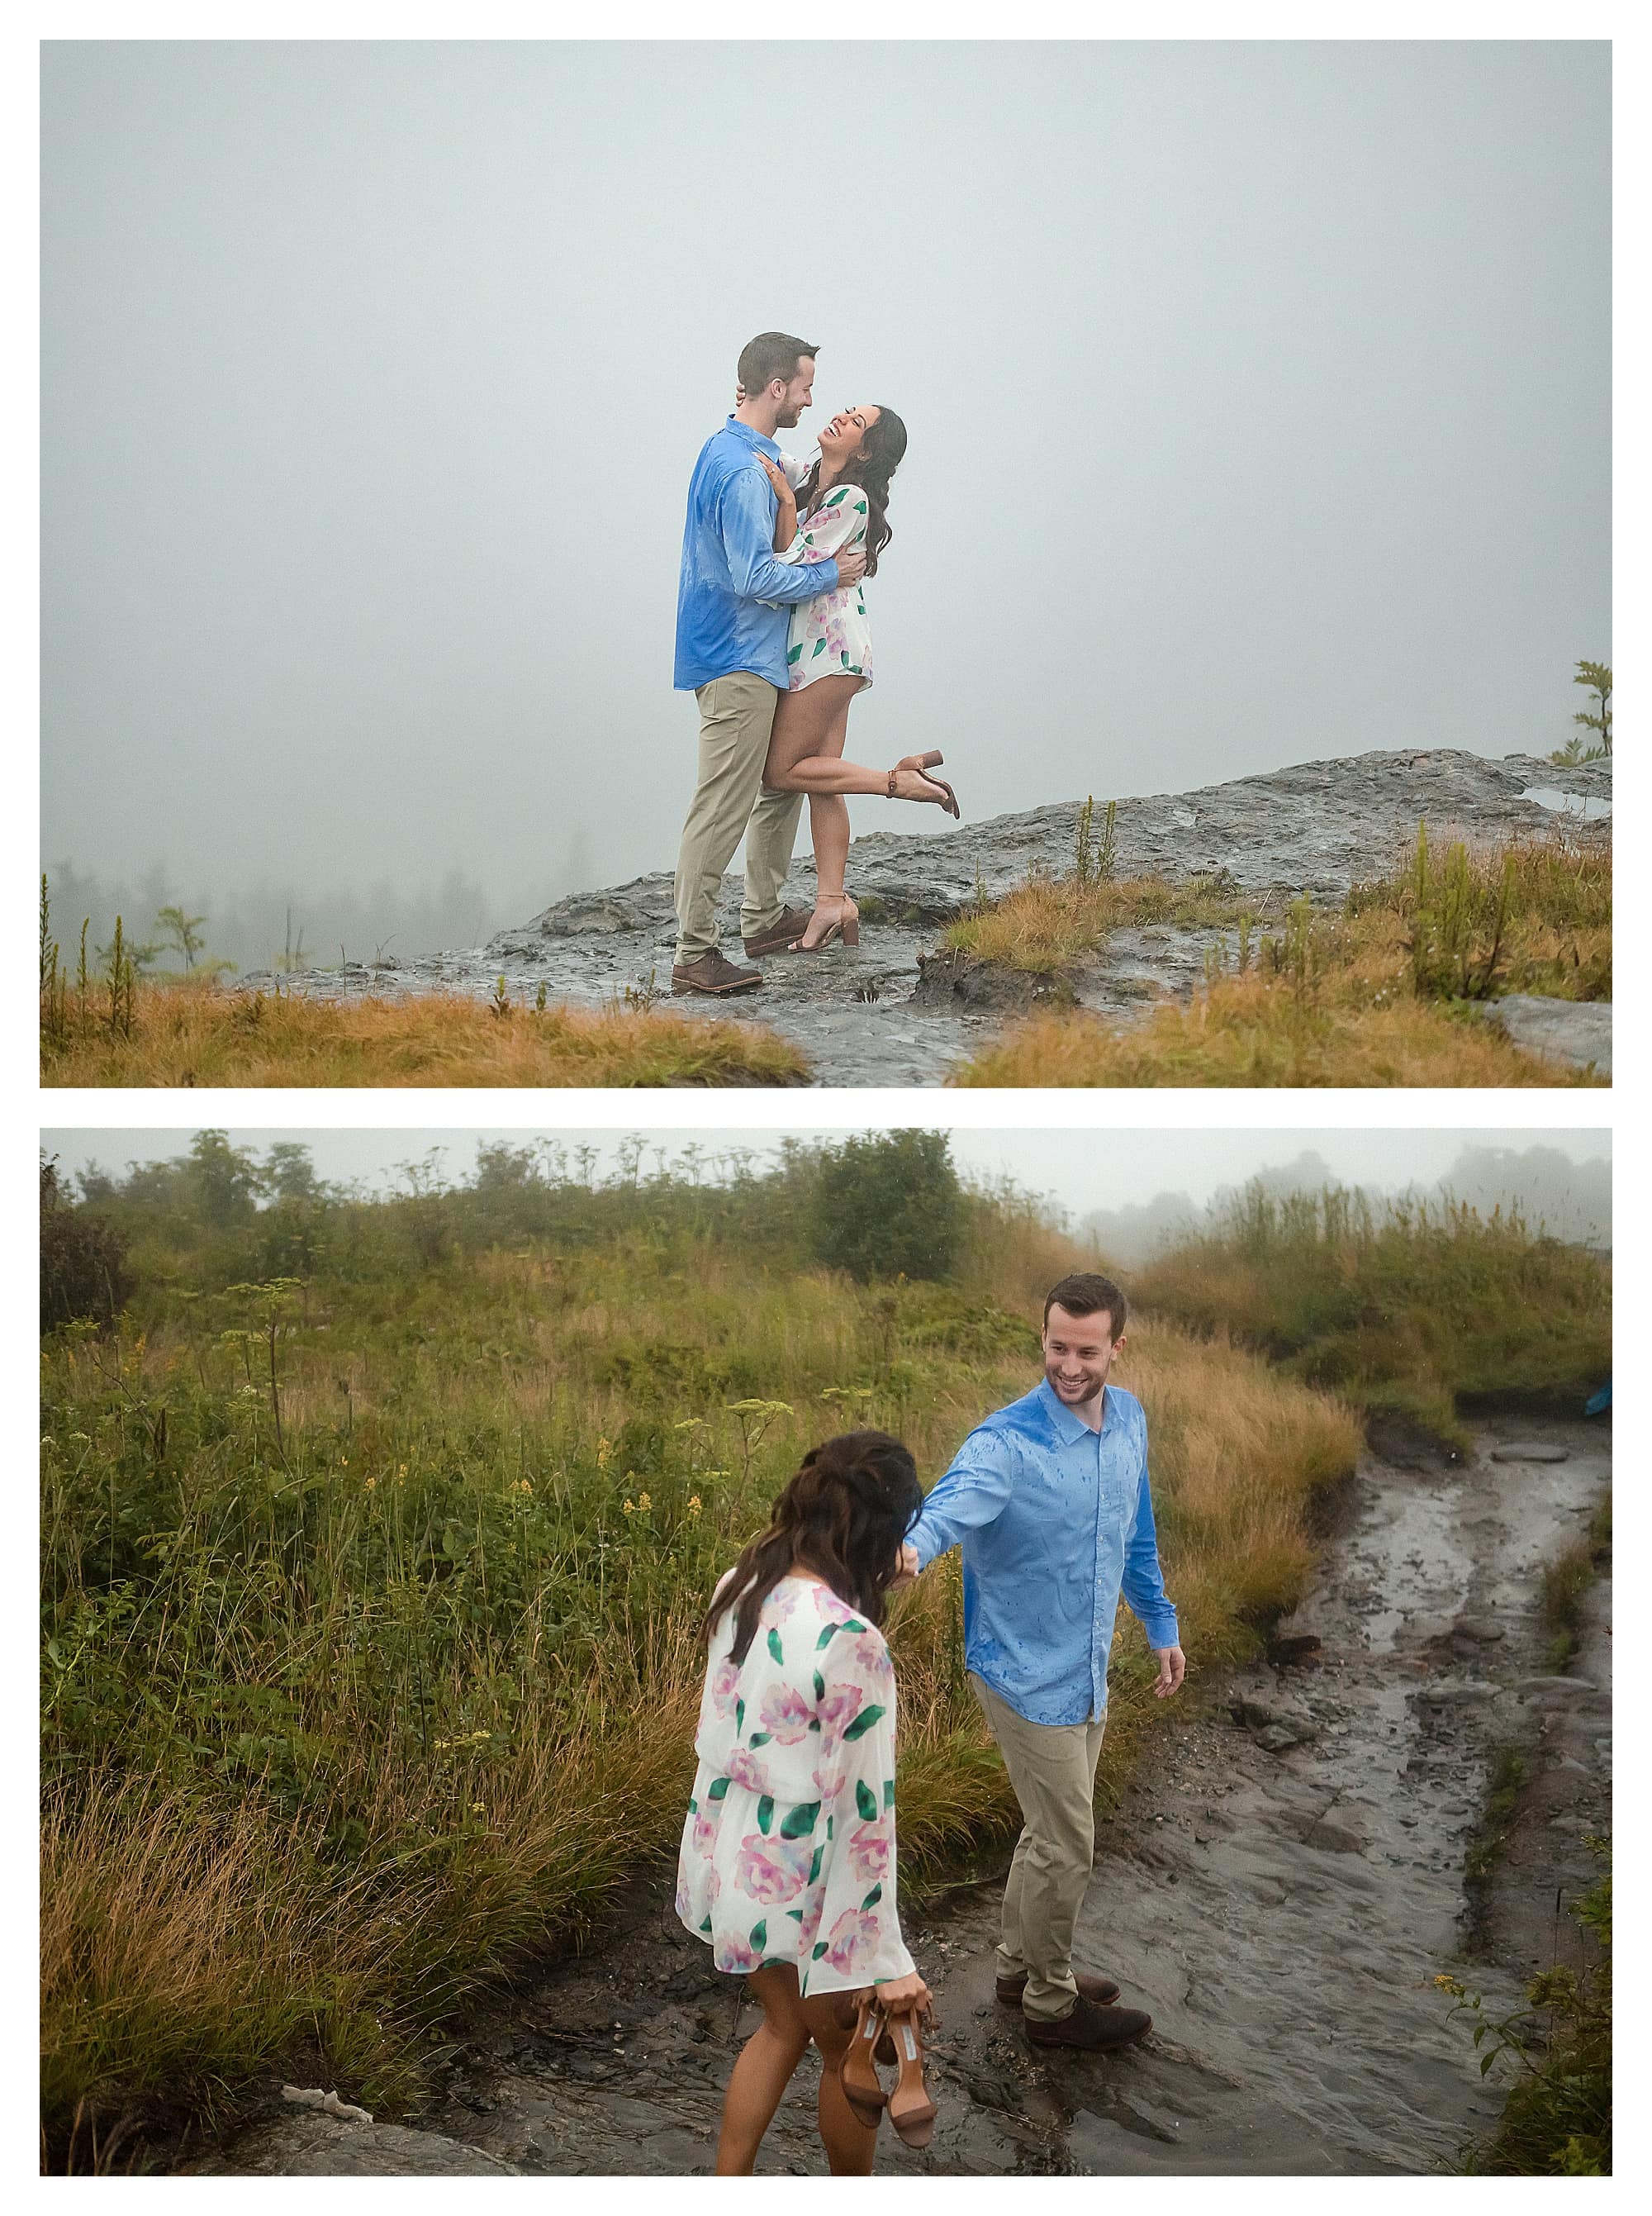 Young newly engaged couple walking down mountain trail on cloudy rainy day